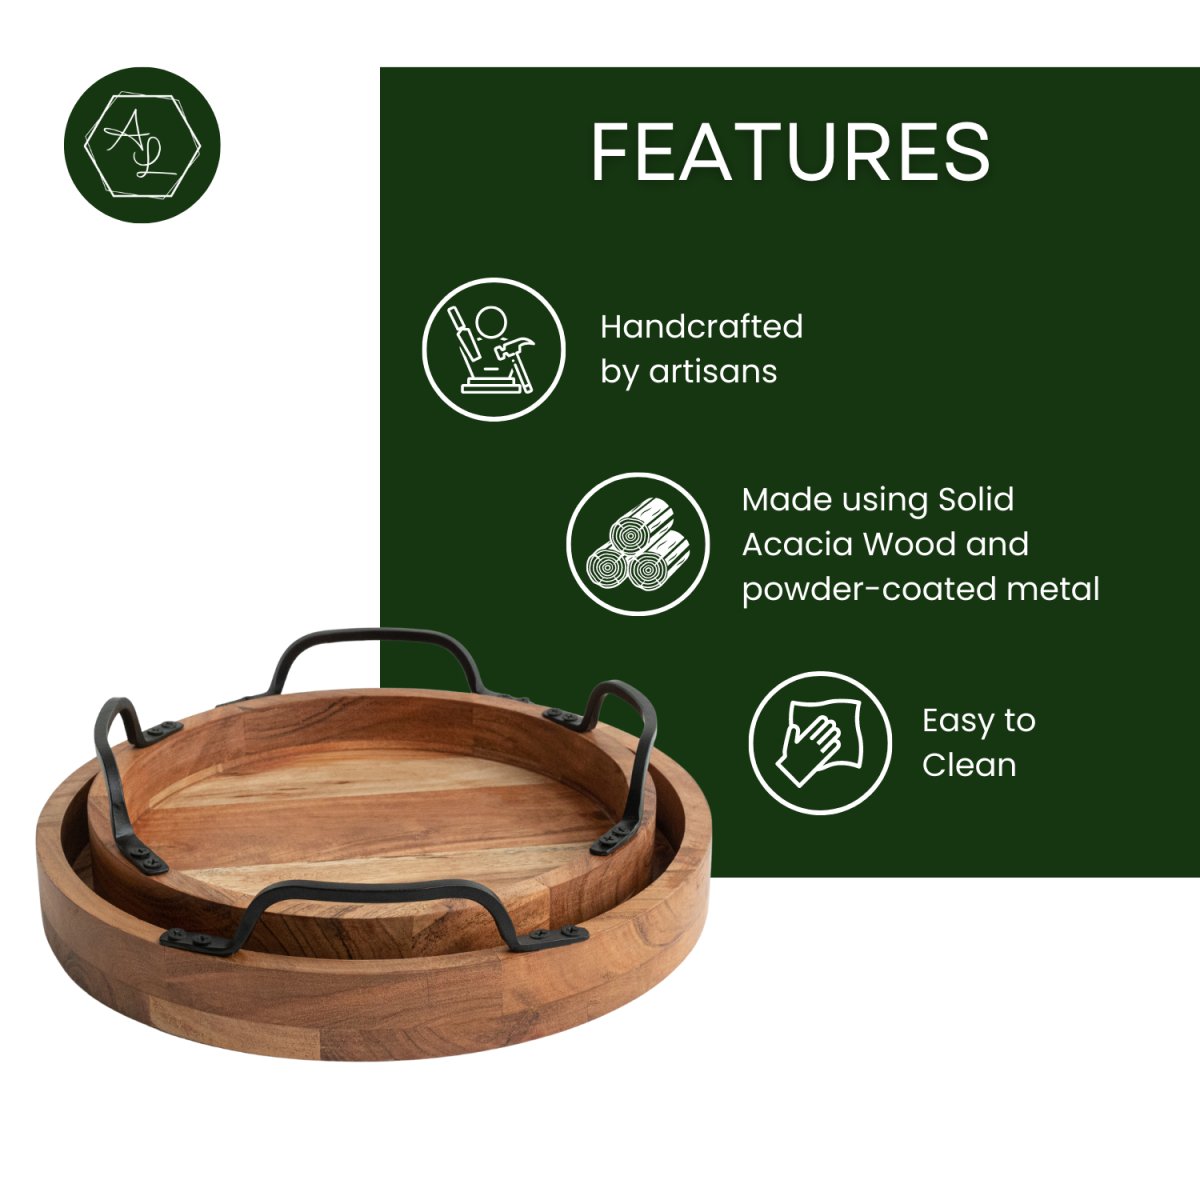 Round Wooden Serving Trays with Black Metal Handles, set of 2 features image - Aesthetic Living